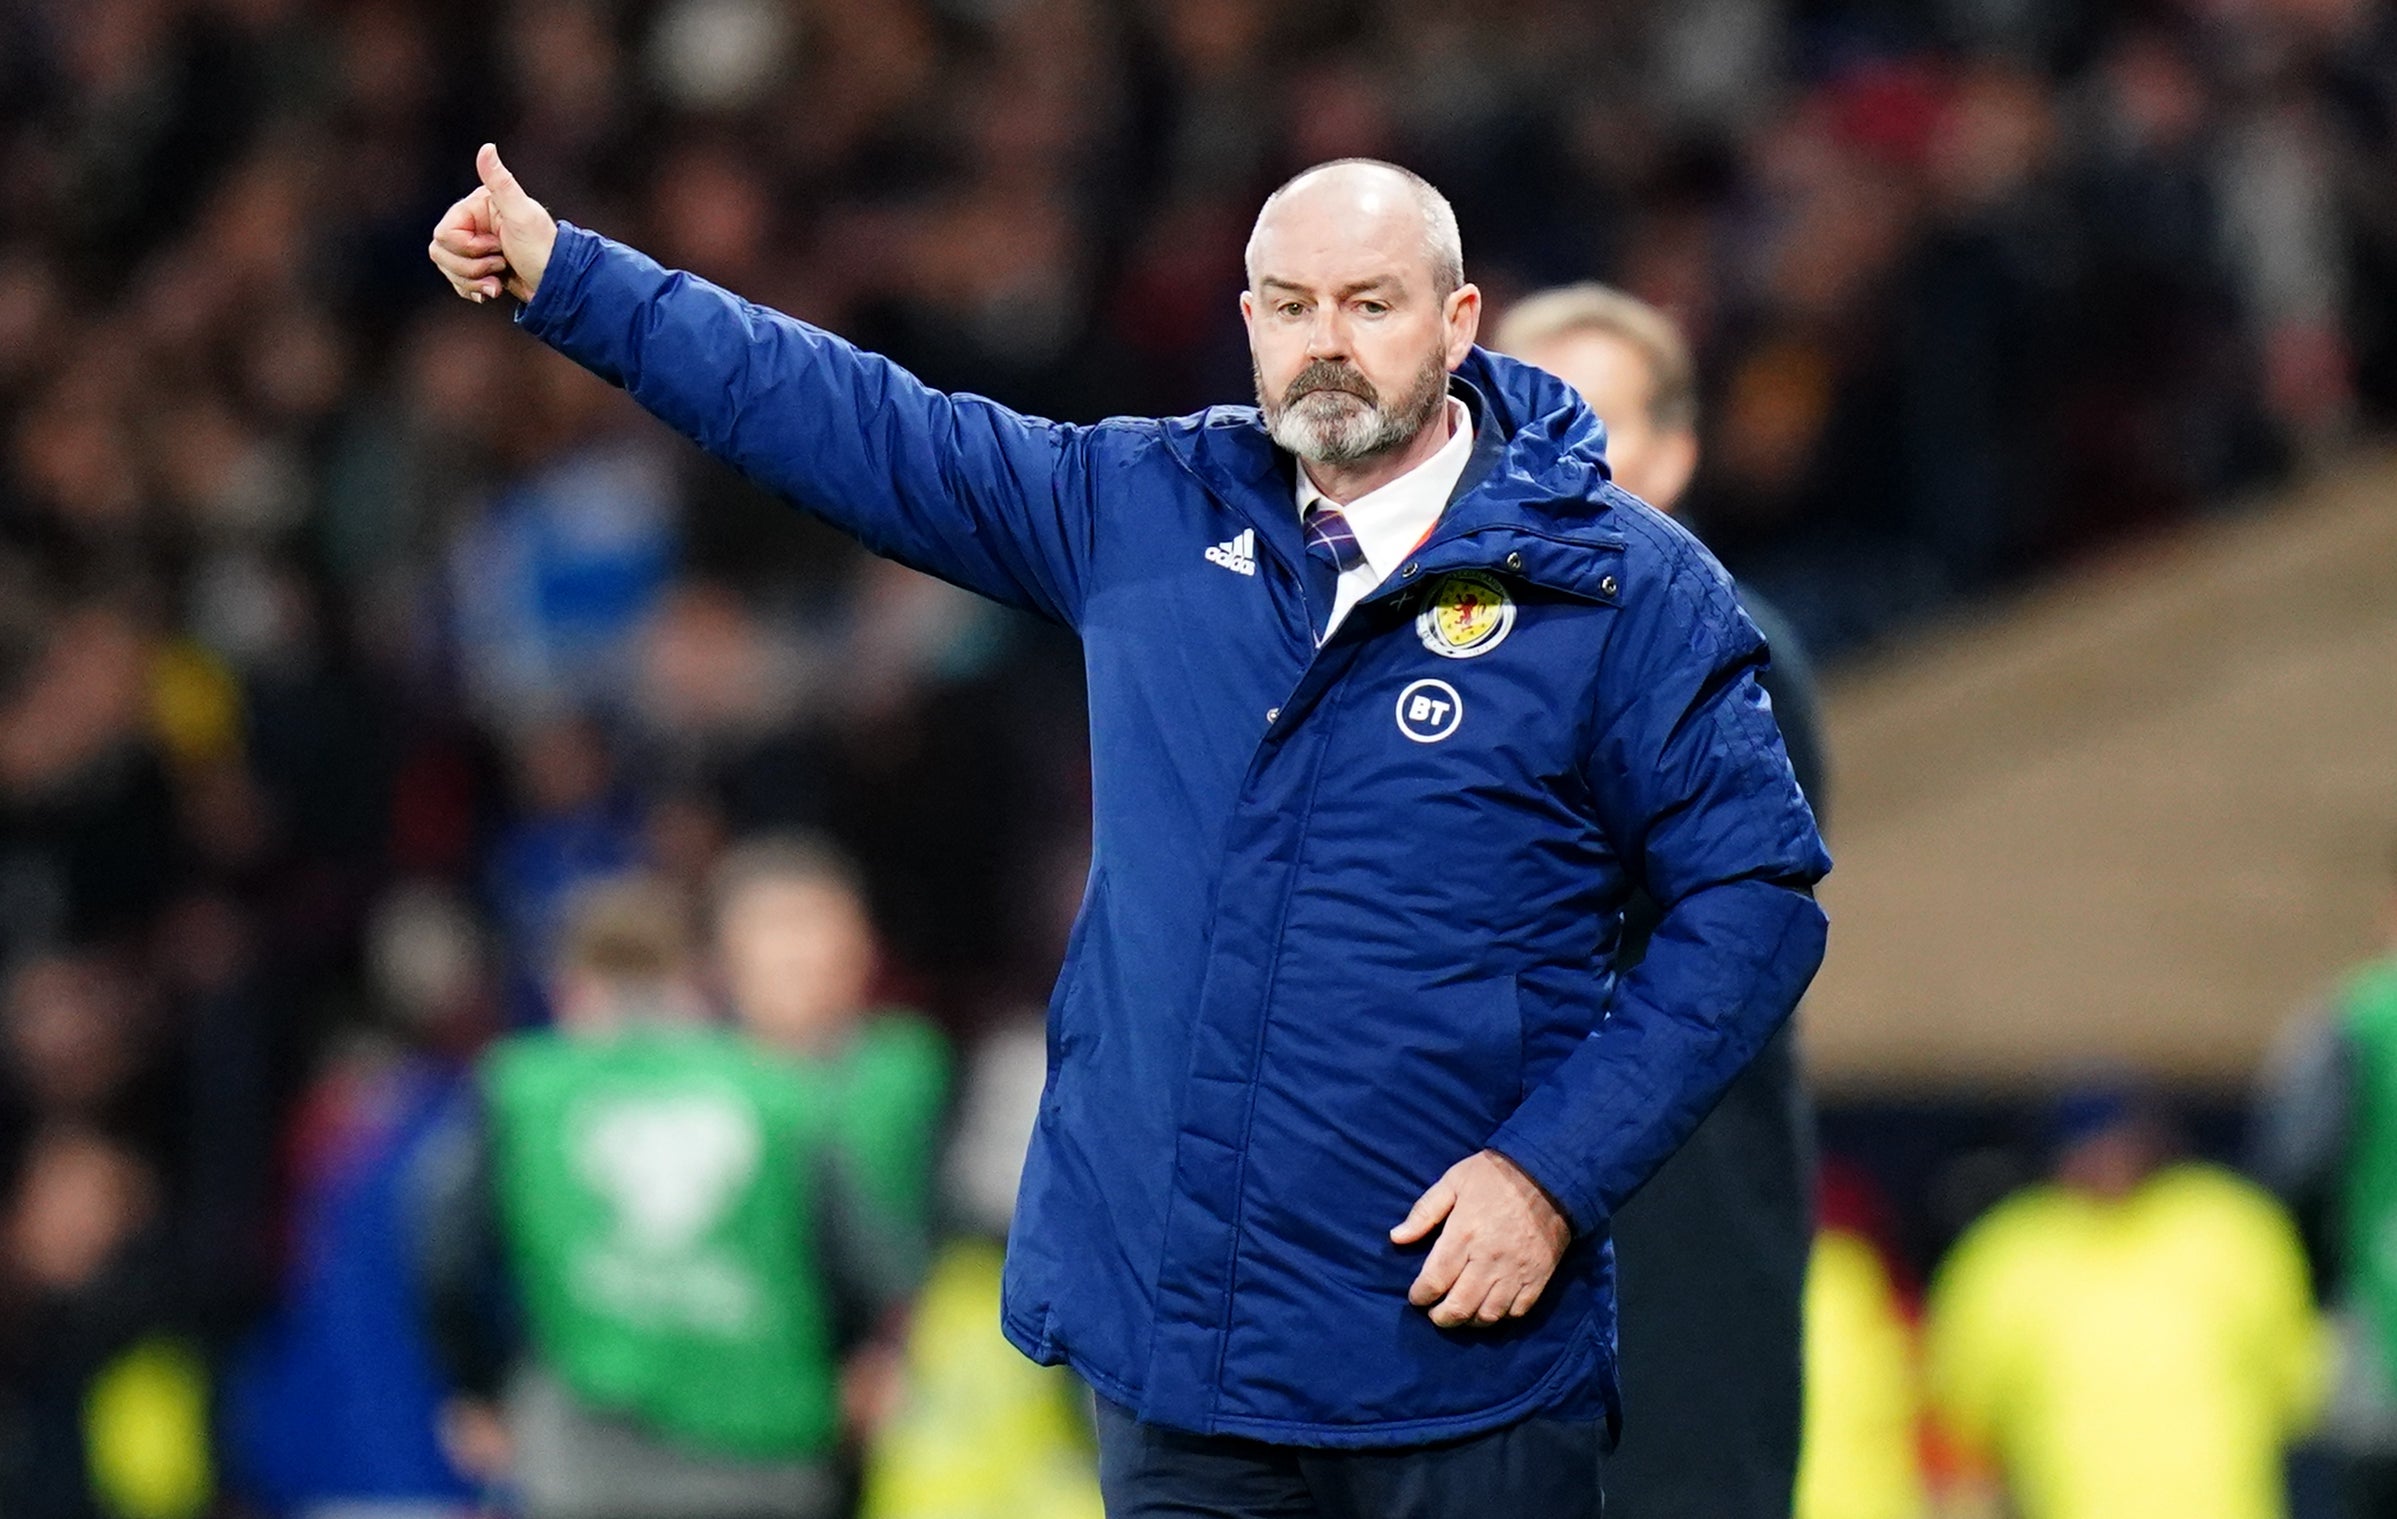 Steve Clarke made use of his substitutes in the closing stages (Jane Barlow/PA)